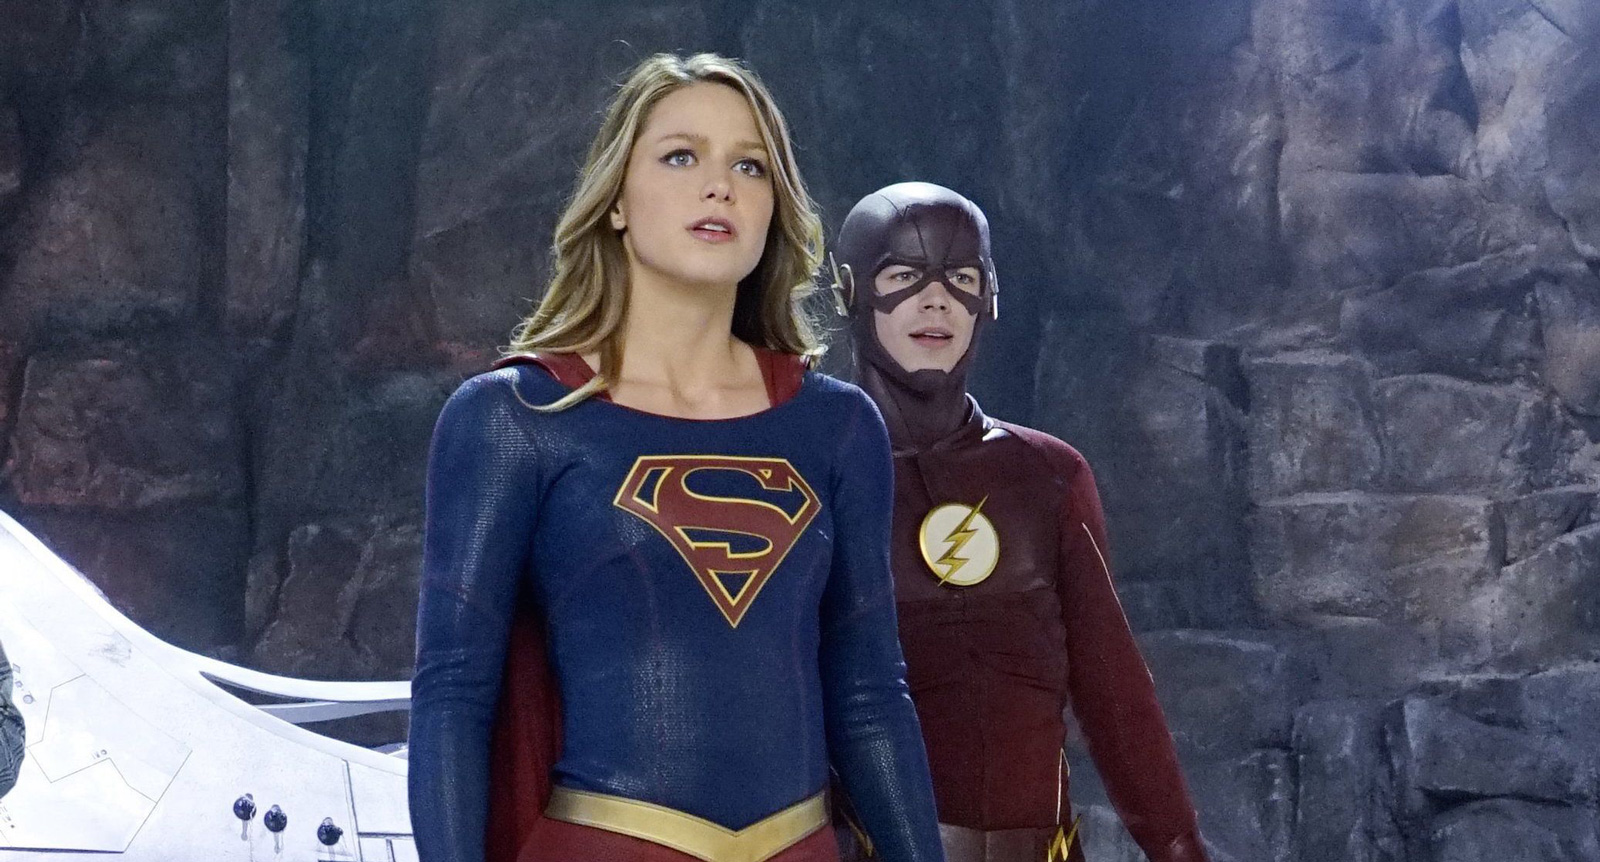 Arrow The Flash Supergirl And Legends Of Tomorrow Crossover Teased With New Trailer Gamesradar